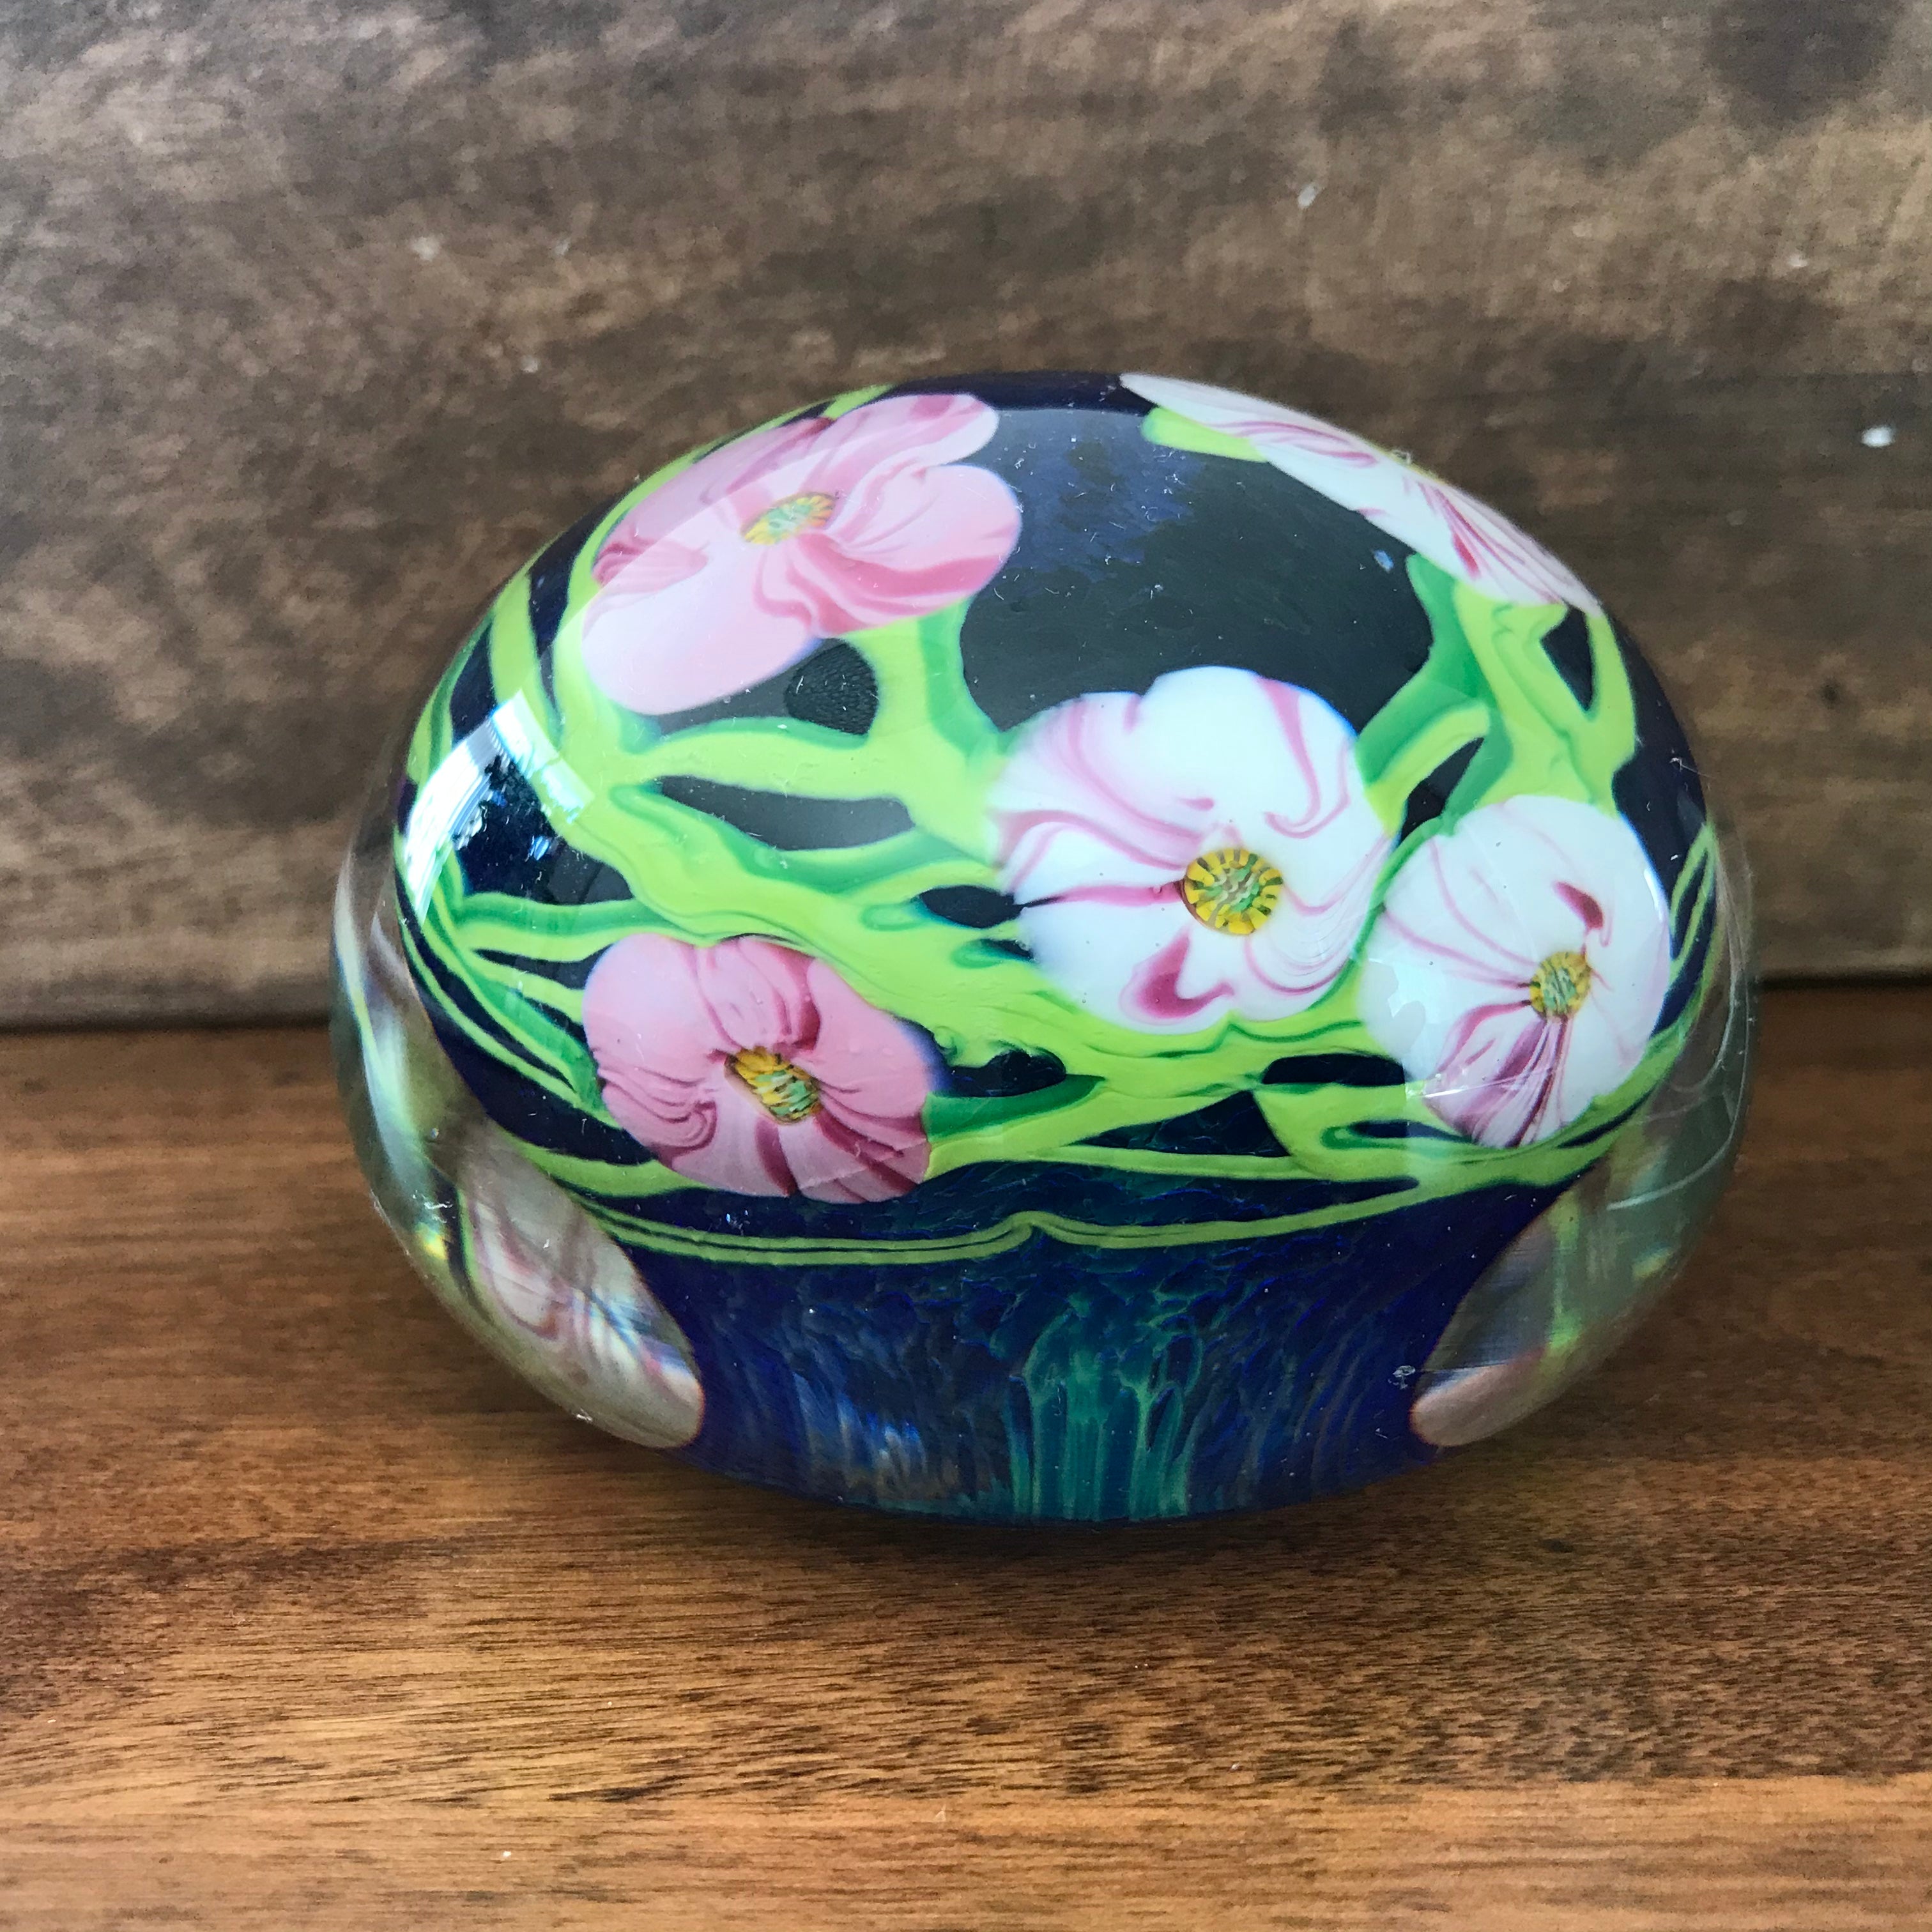 Unmarked magnum paperweight with flowers with millefiori center